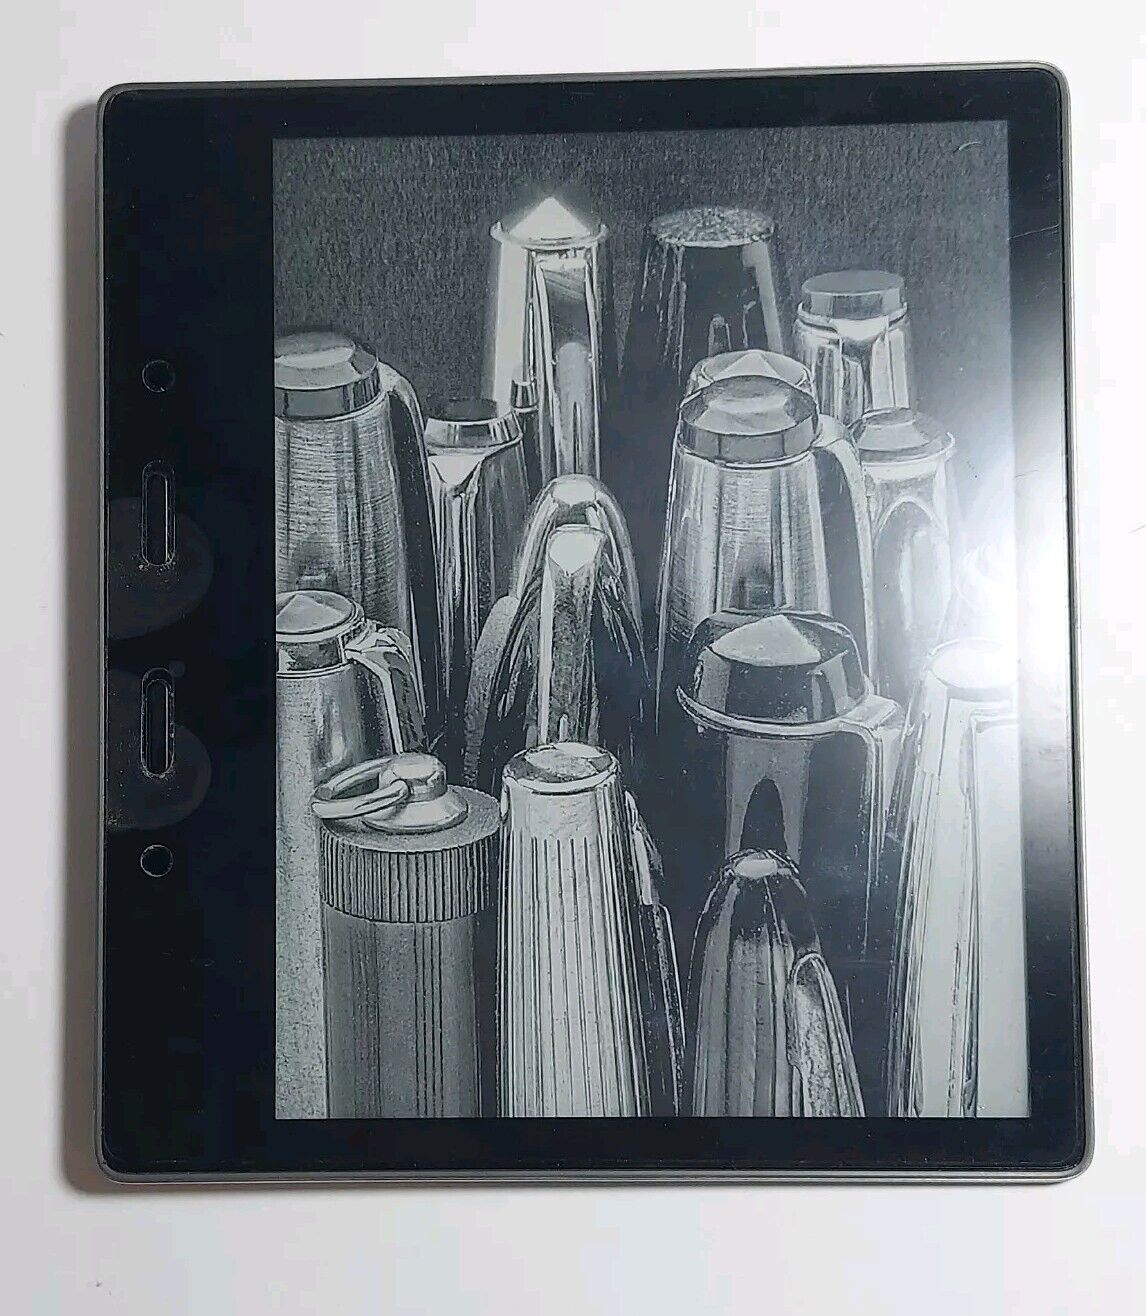 Amazon Kindle Oasis -  Model CW96BW - 32gb 7inch 9th Gen Ereader. Preowned